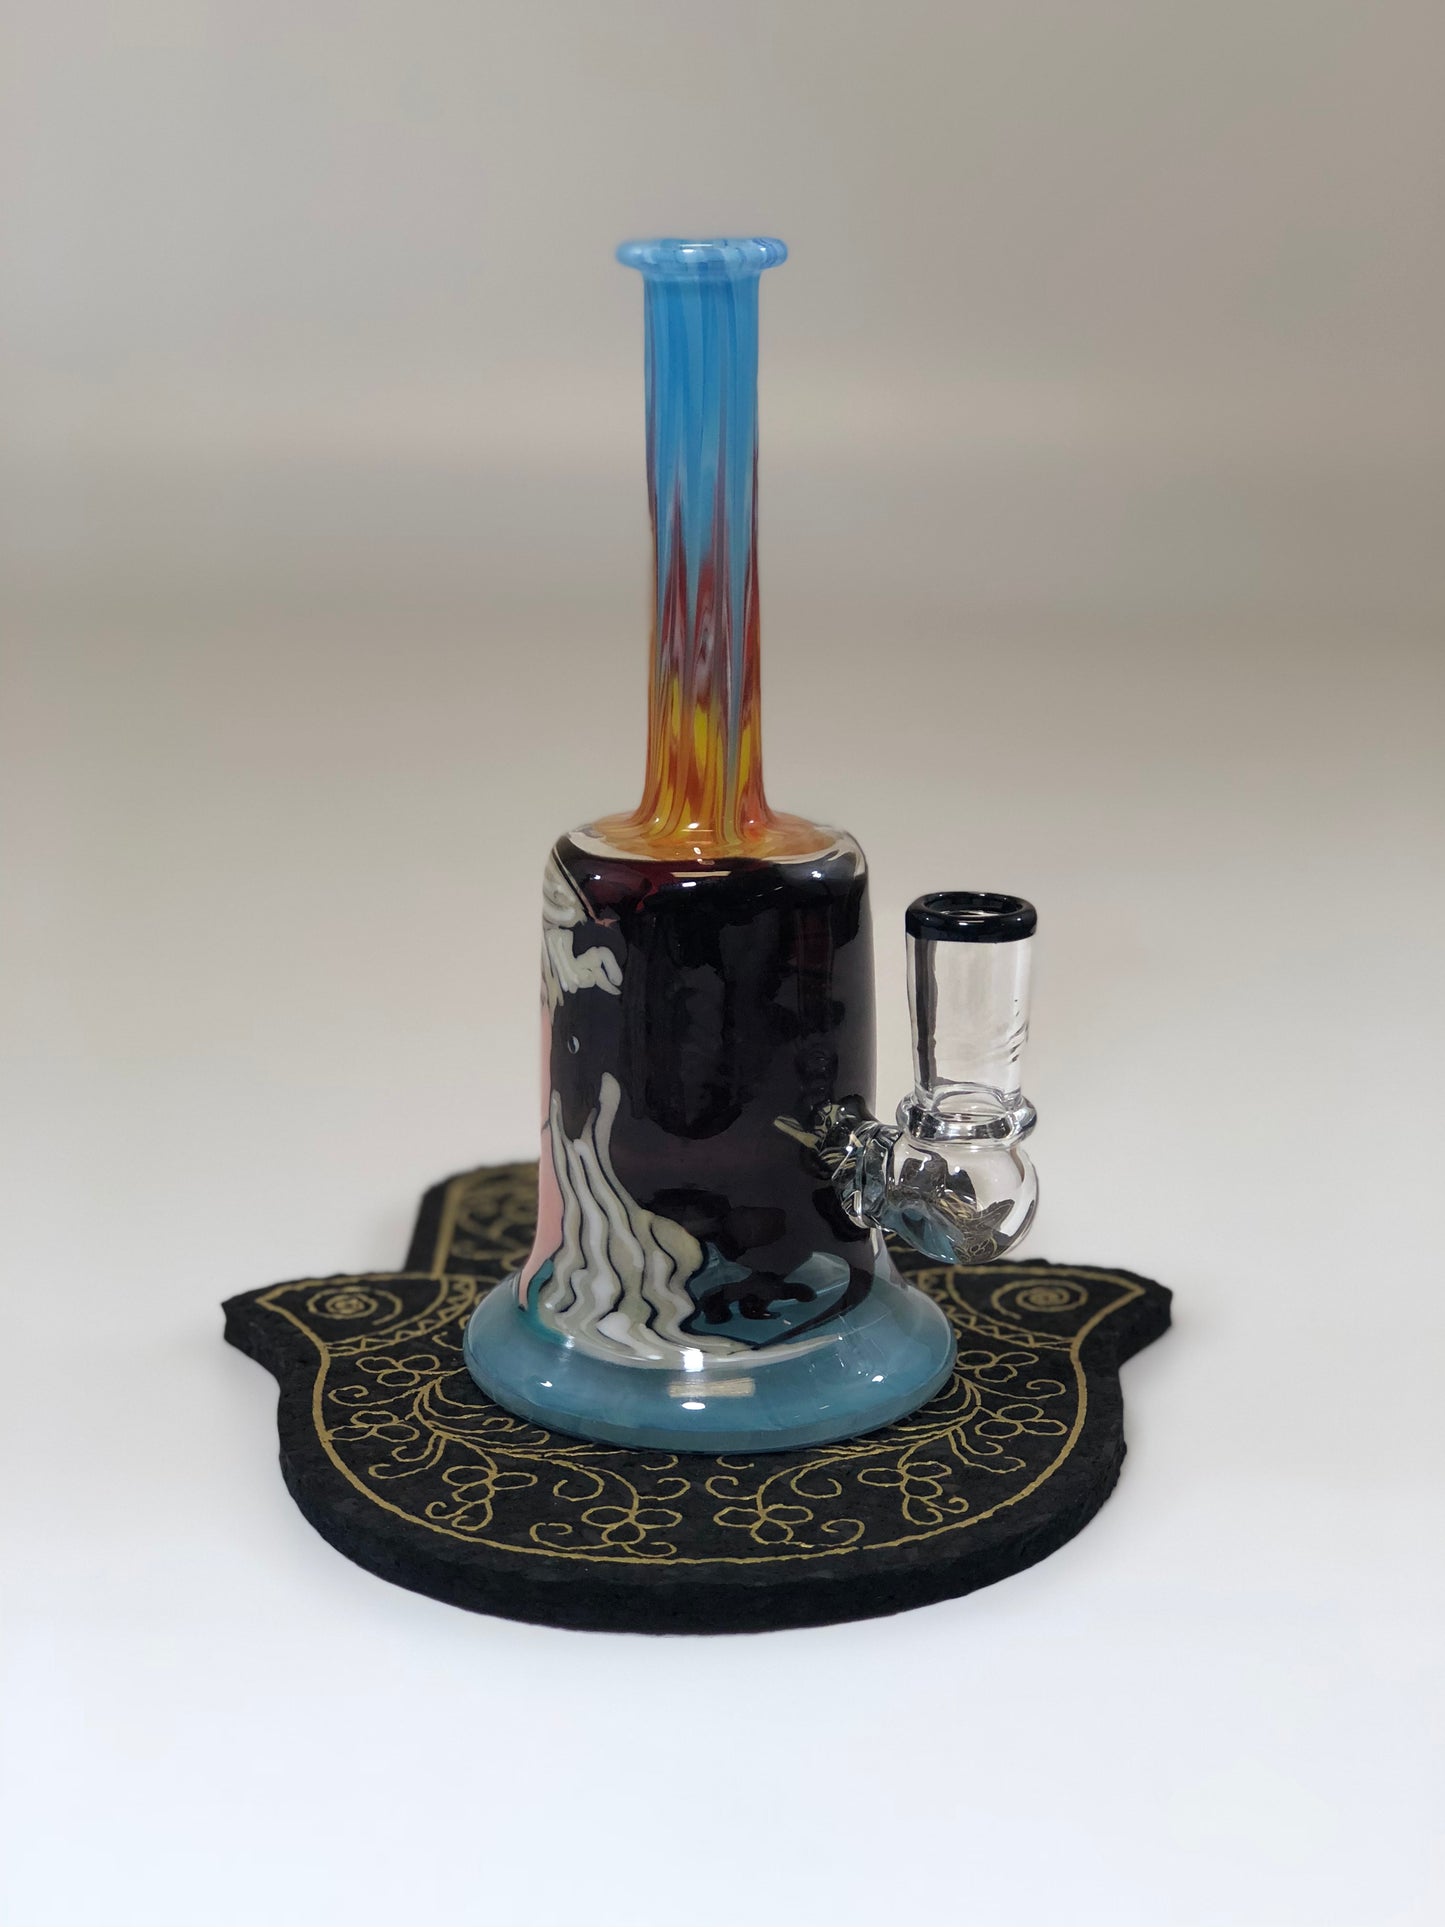 Game of Thrones Themed Stringertech rig by Windstar Glass